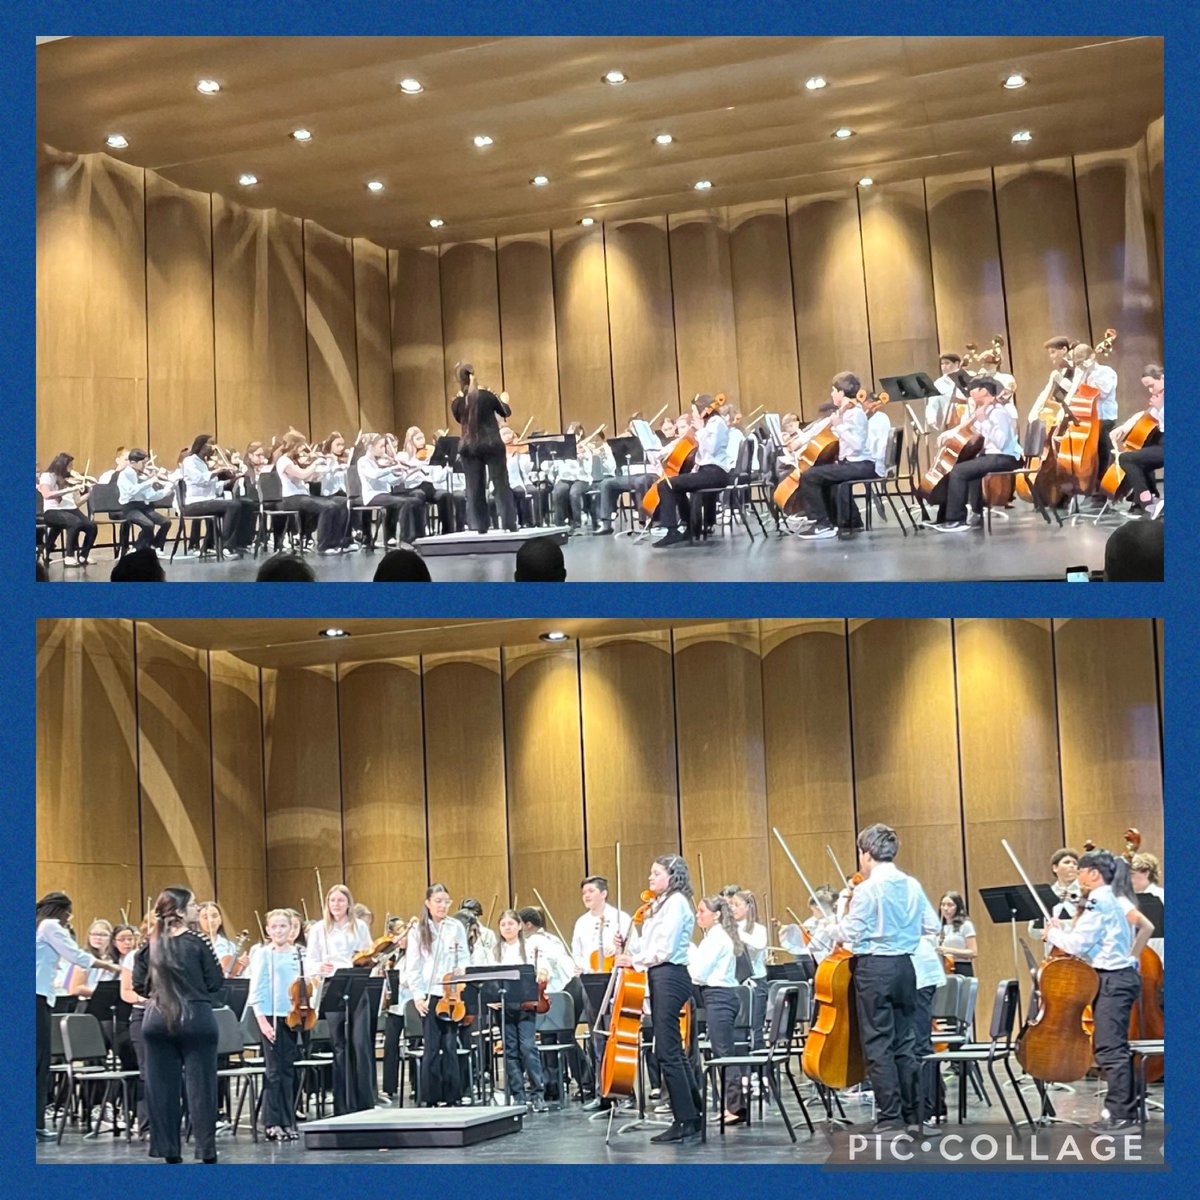 Congratulations to SRMS Orchestra for a great performance today! @ICastillo_SRMS @Woods_SRMS @ENFlores_SRMS